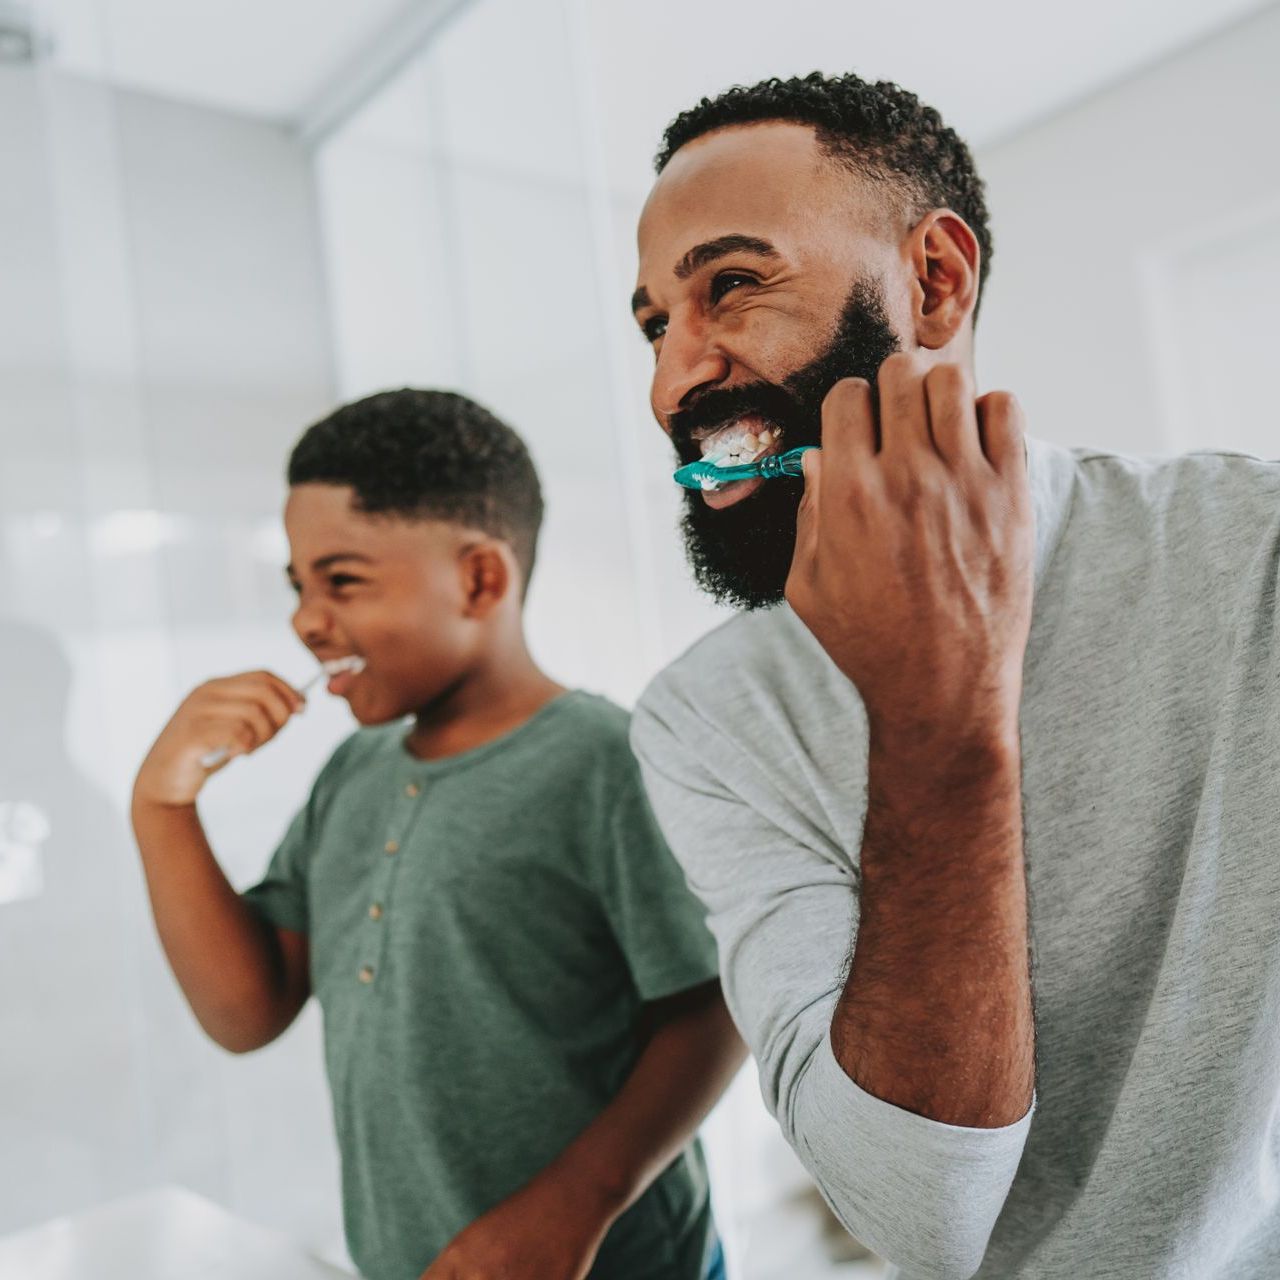 A man with a beard is brushing his teeth next to a young boy